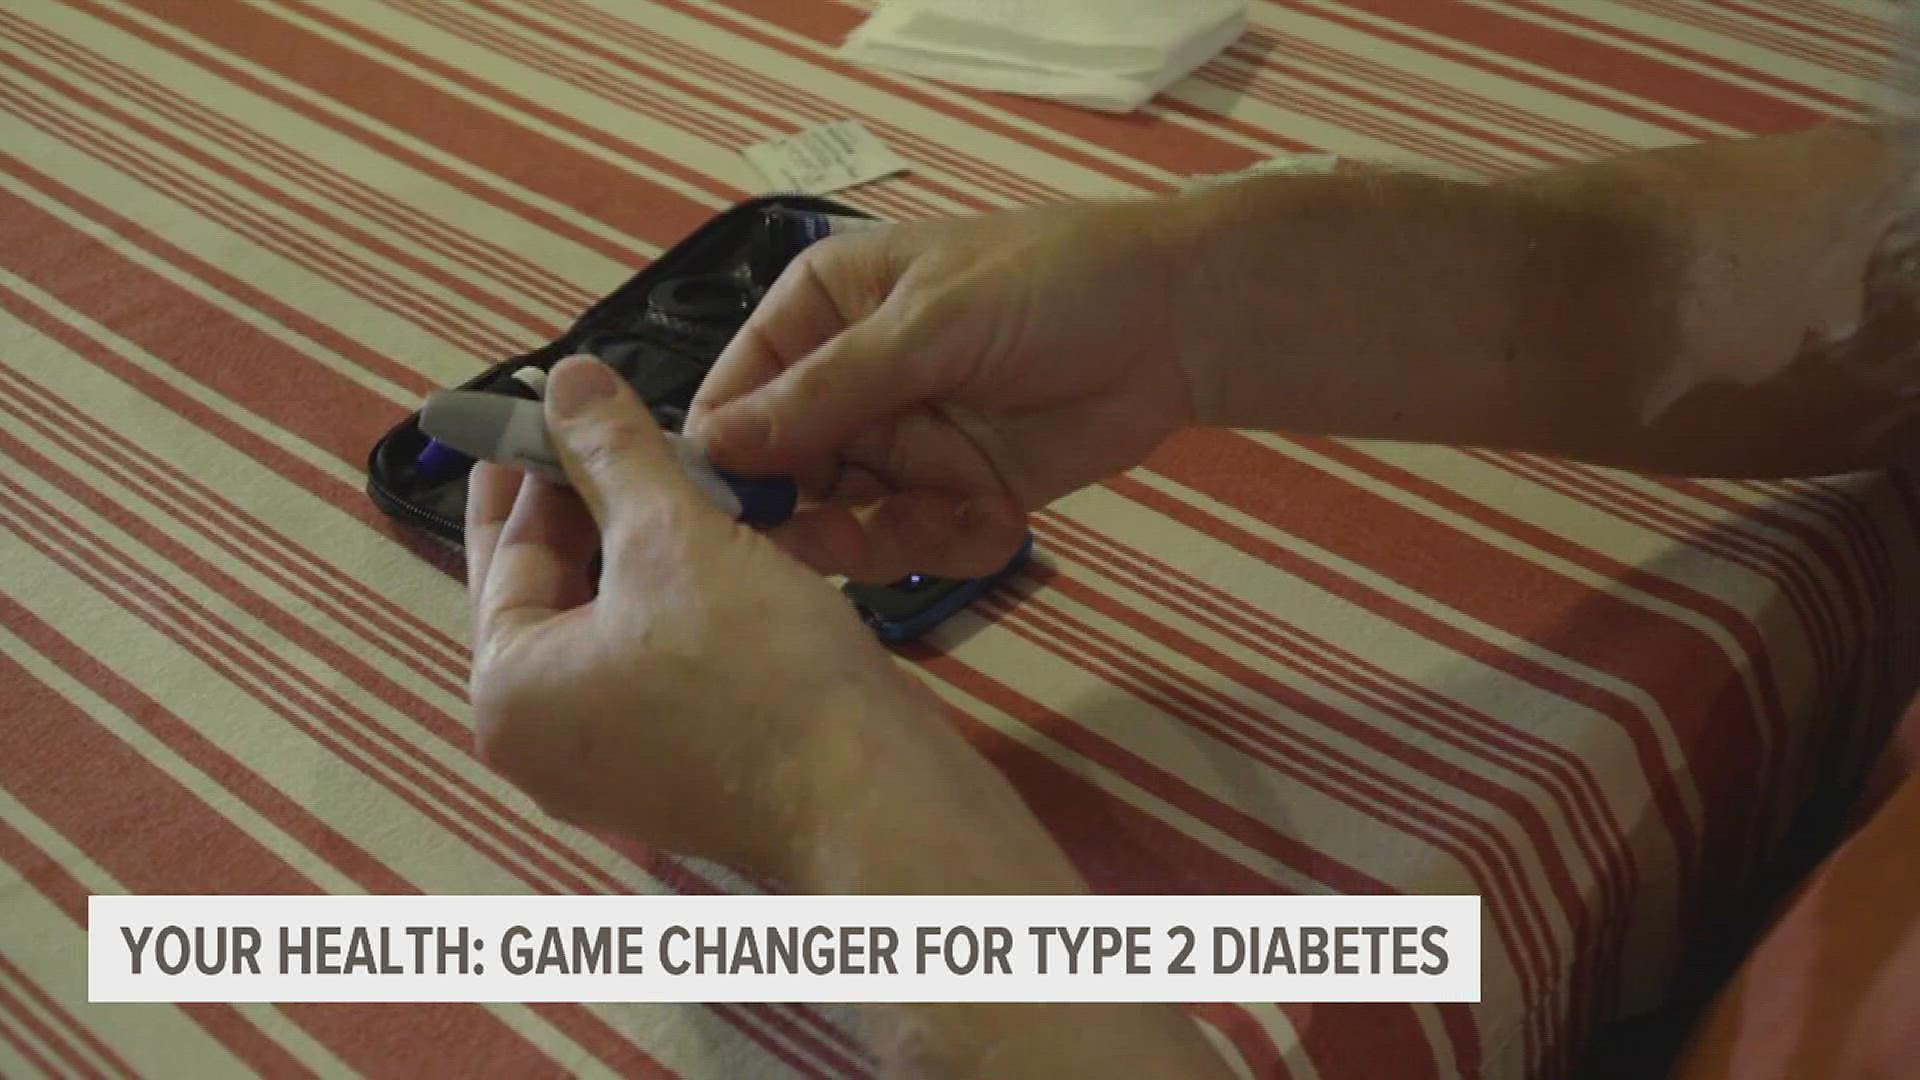 More than 37 million Americans are living with it right now, and more than 90% of those have Type 2 diabetes.